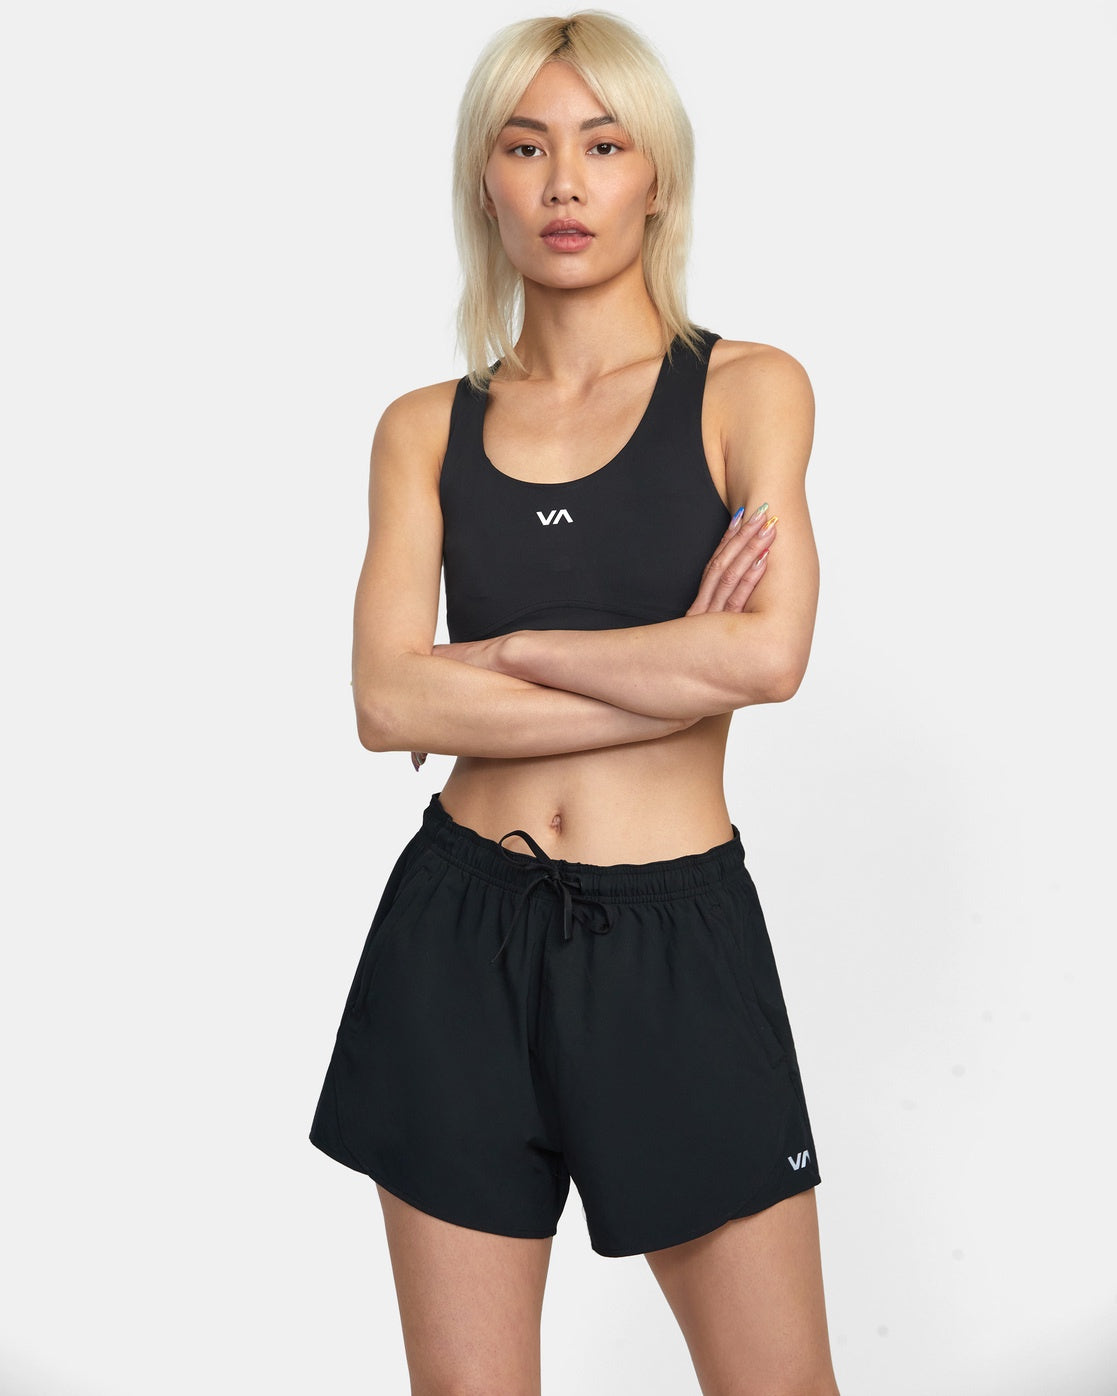 What are the Ideal Fabrics for Girls' Sport Shorts